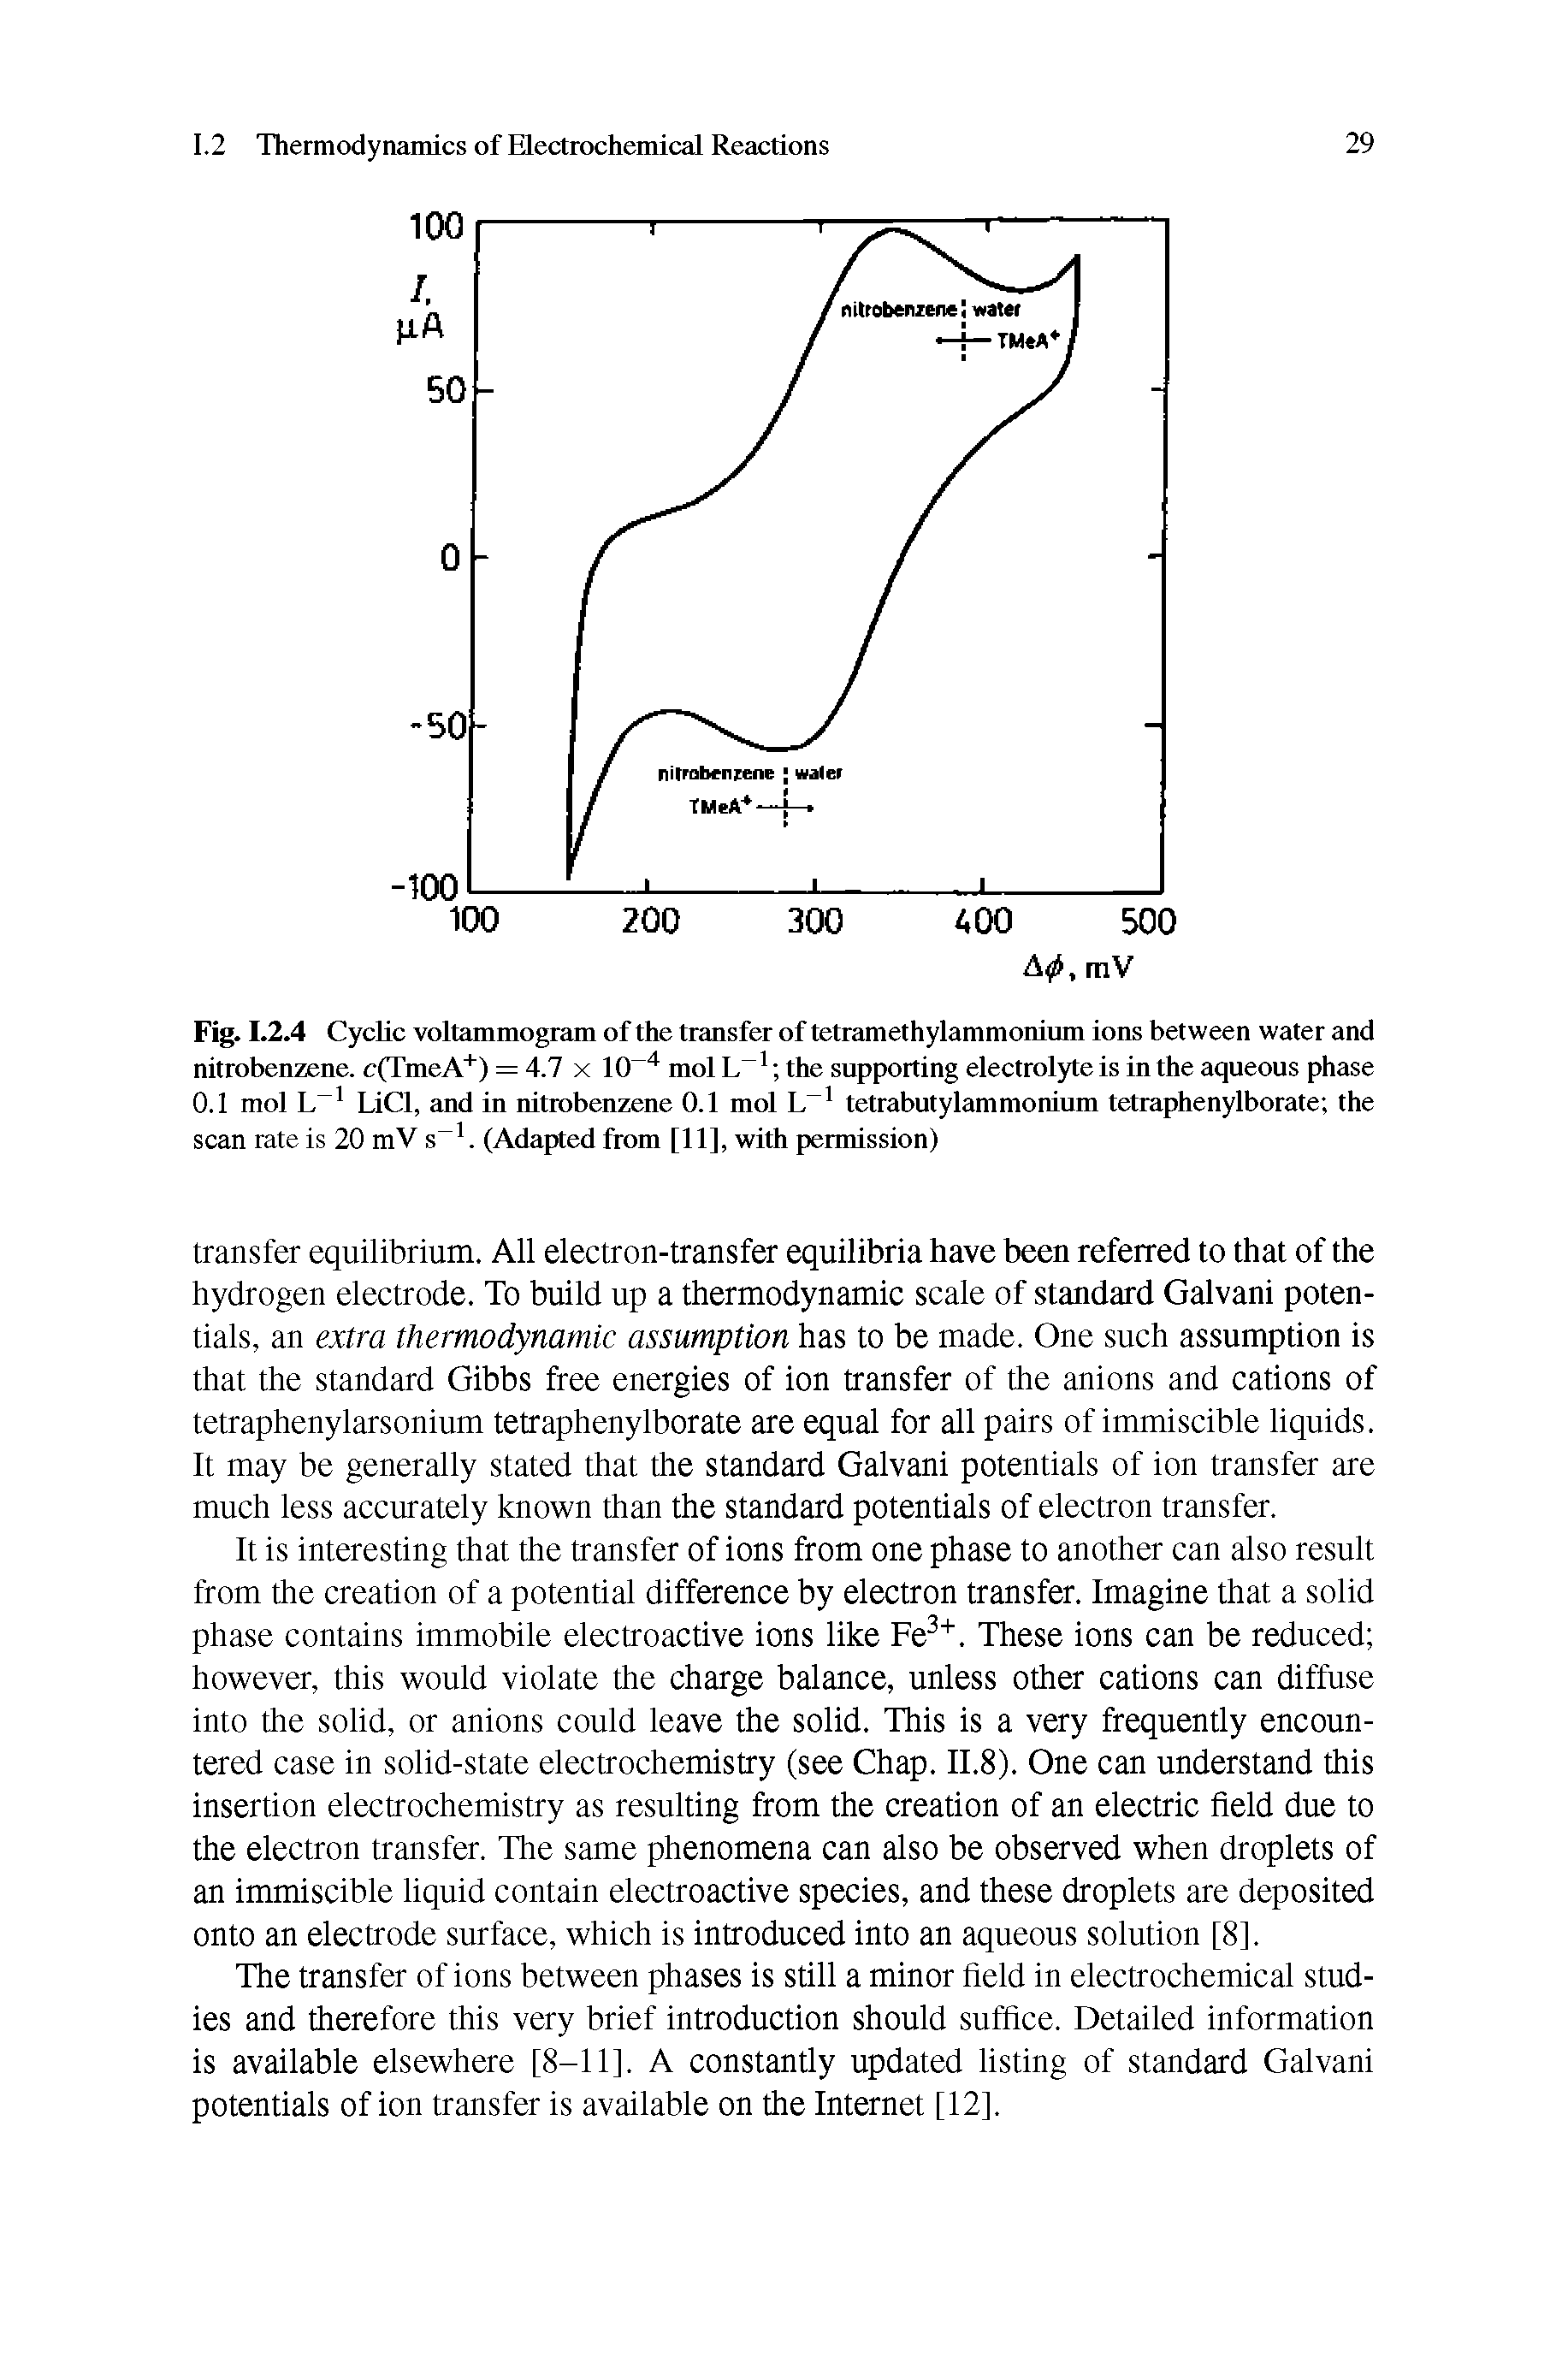 Fig. 1.2.4 Cyclic voltammogram of the transfer of tetramethylammonium ions between water and nitrobenzene. c(TmeA ) = 4.7 x 10 mol L the supporting electrolyte is in the aqueous phase 0.1 mol L LiCl, and in nitrobenzene 0.1 mol L tetrabutylammonium tetraphenylborate the scan rate is 20 mV s . (Adapted from [11], with permission)...